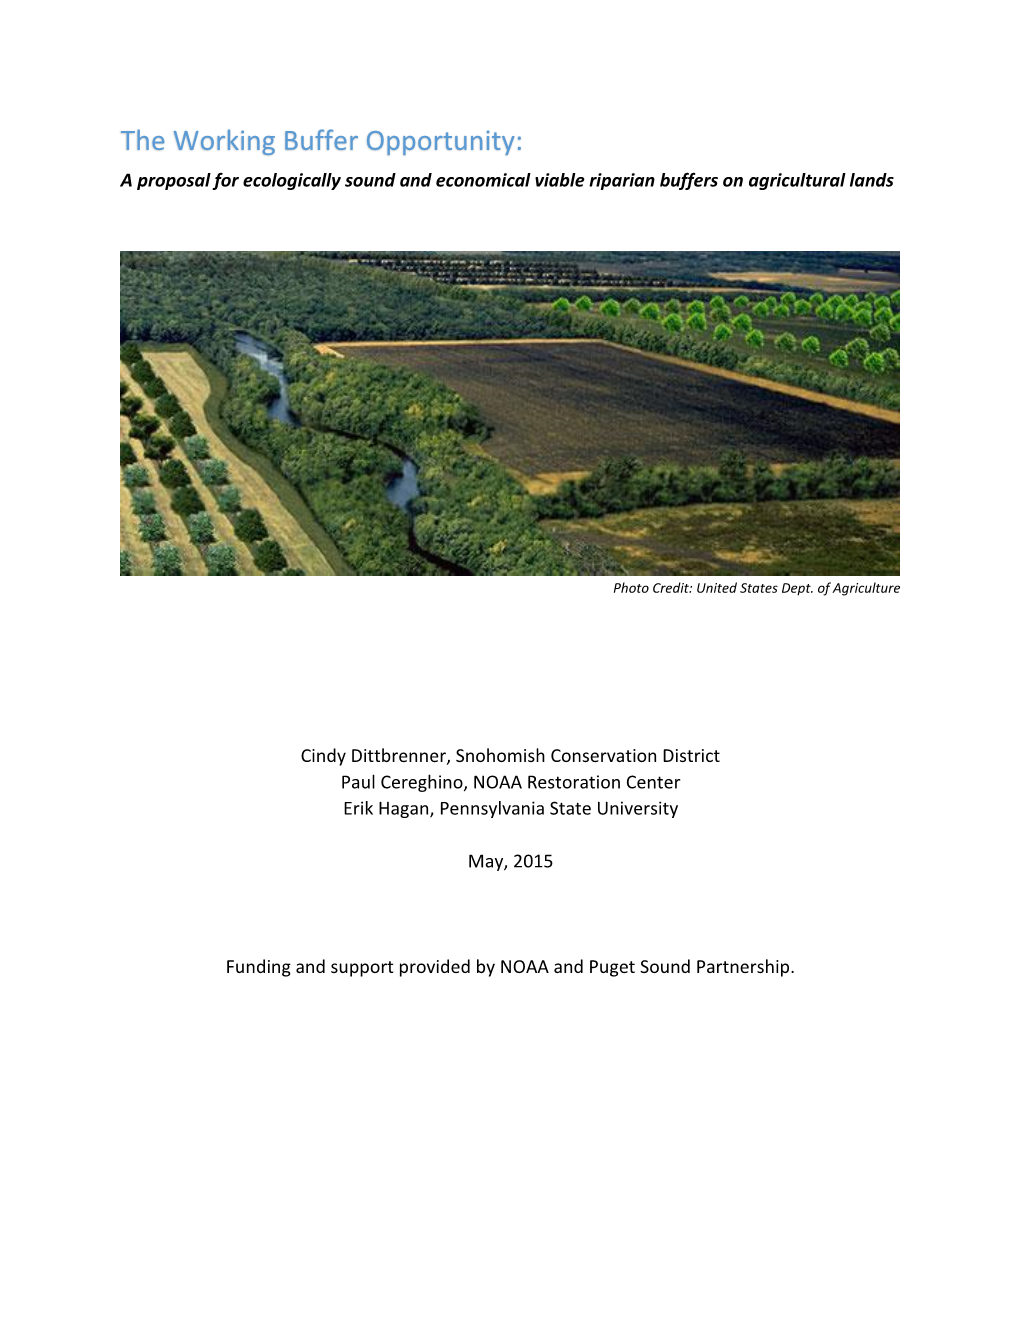 The Working Buffer Opportunity: a Proposal for Ecologically Sound and Economical Viable Riparian Buffers on Agricultural Lands